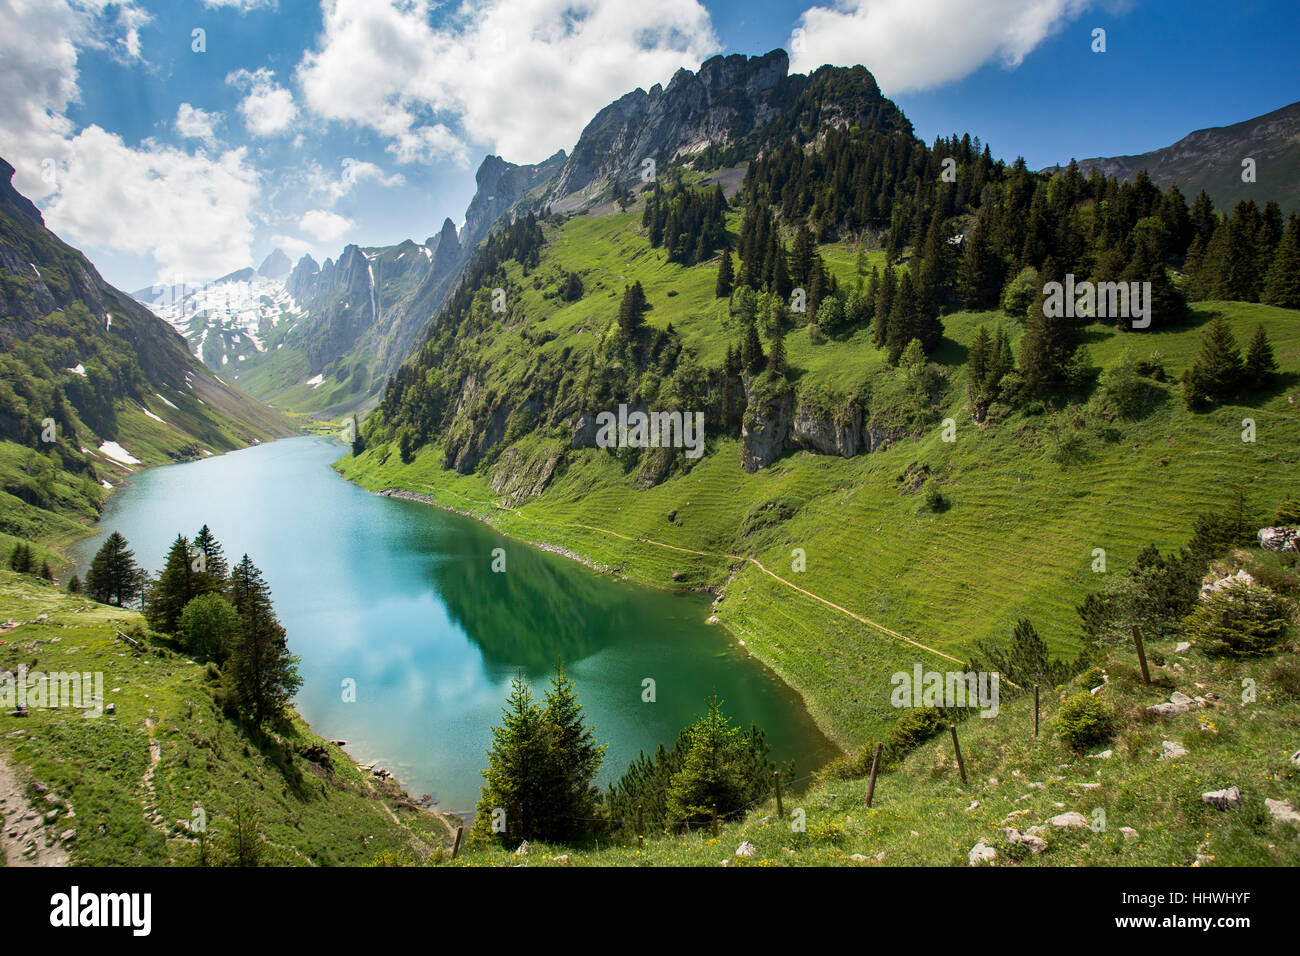 View of Lake Fählensee from Bollenwees Alp, Rüte, Canton of Appenzell Innerrhoden, Switzerland Stock Photo